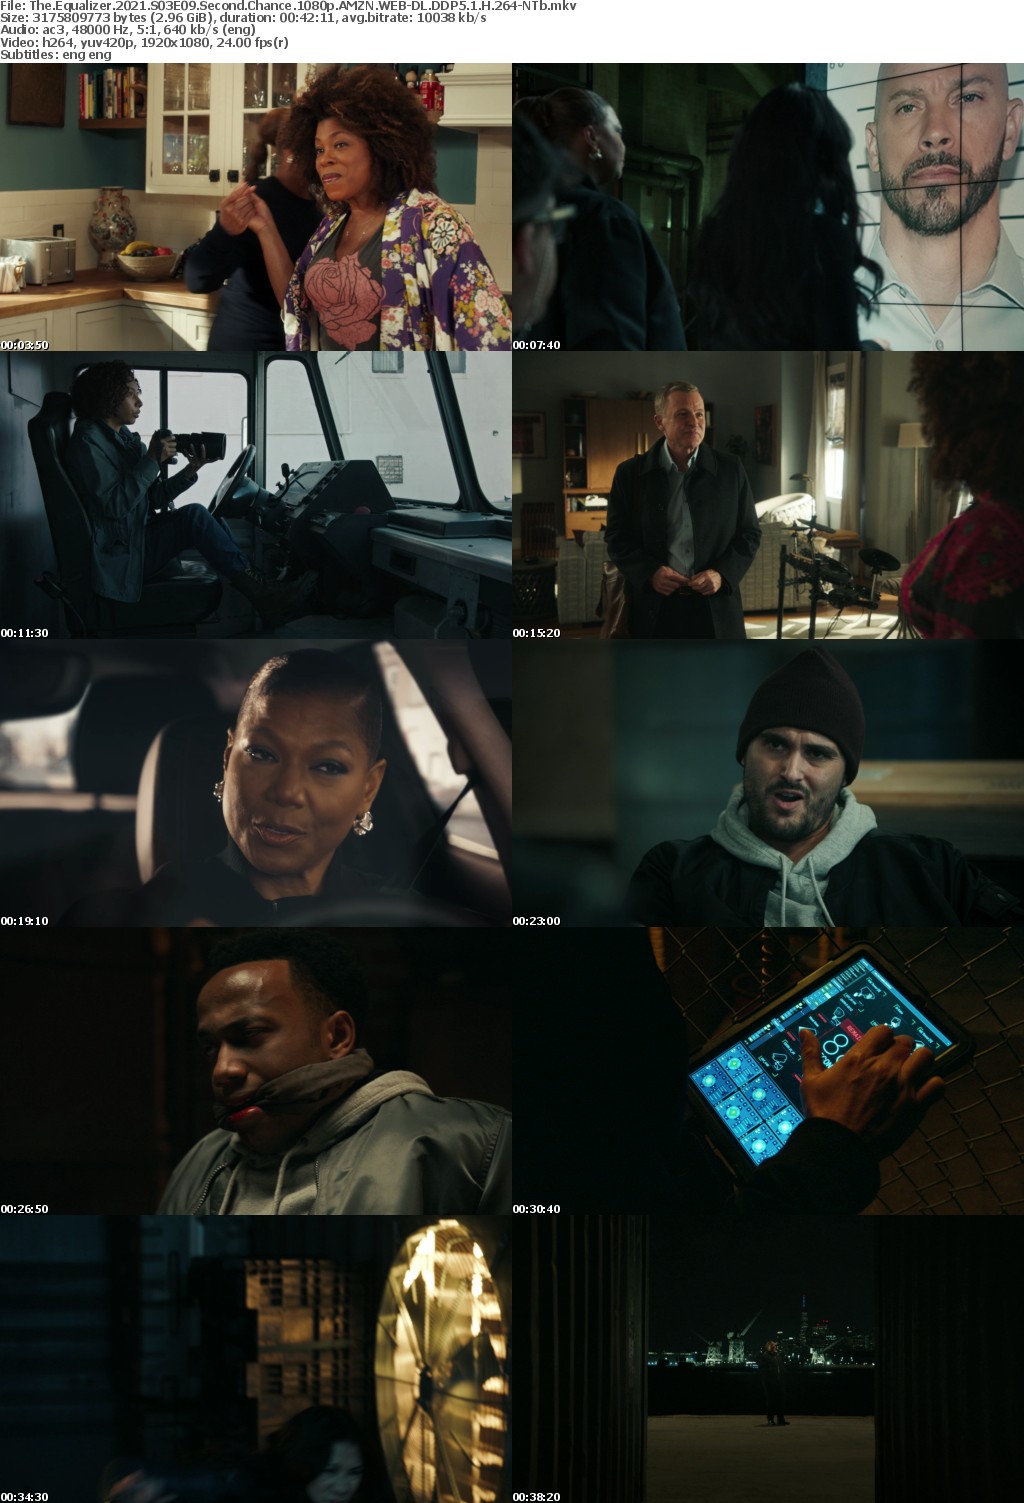 The Equalizer 2021 S03E09 Second Chance 1080p AMZN WEBRip DDP5 1 x264-NTb